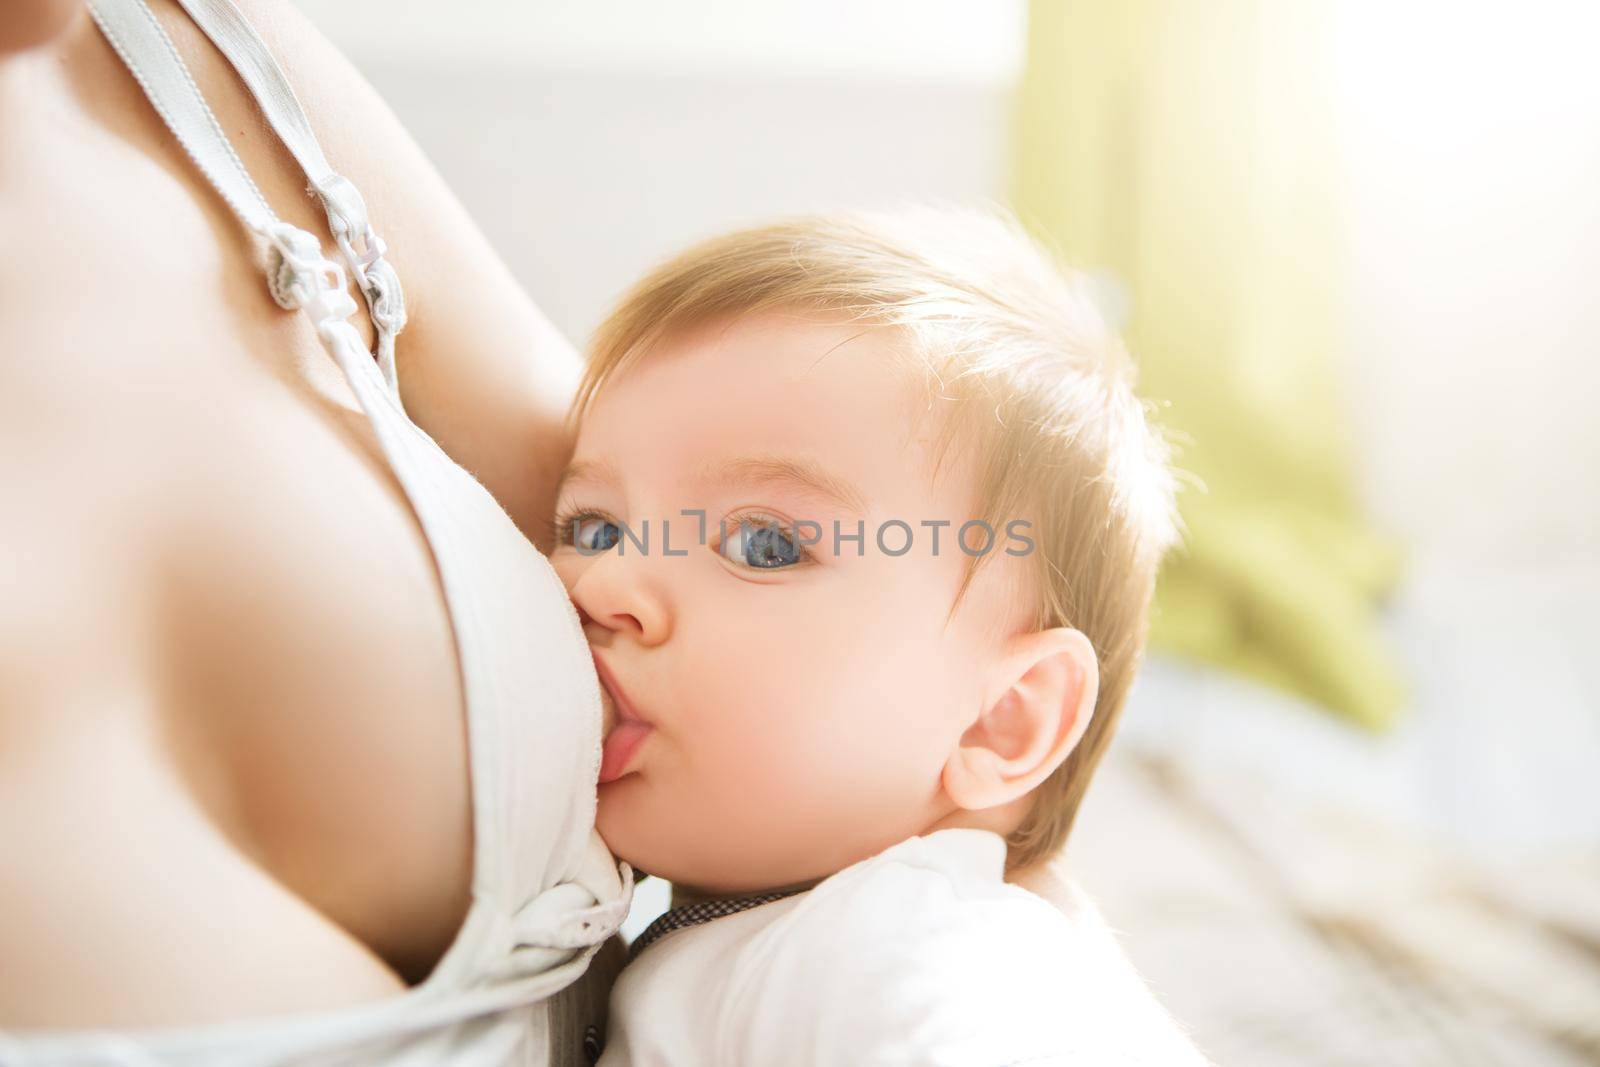 Mother breast feeding her little boy. Mom nursing and feeding baby. Close-up portrait of infant.